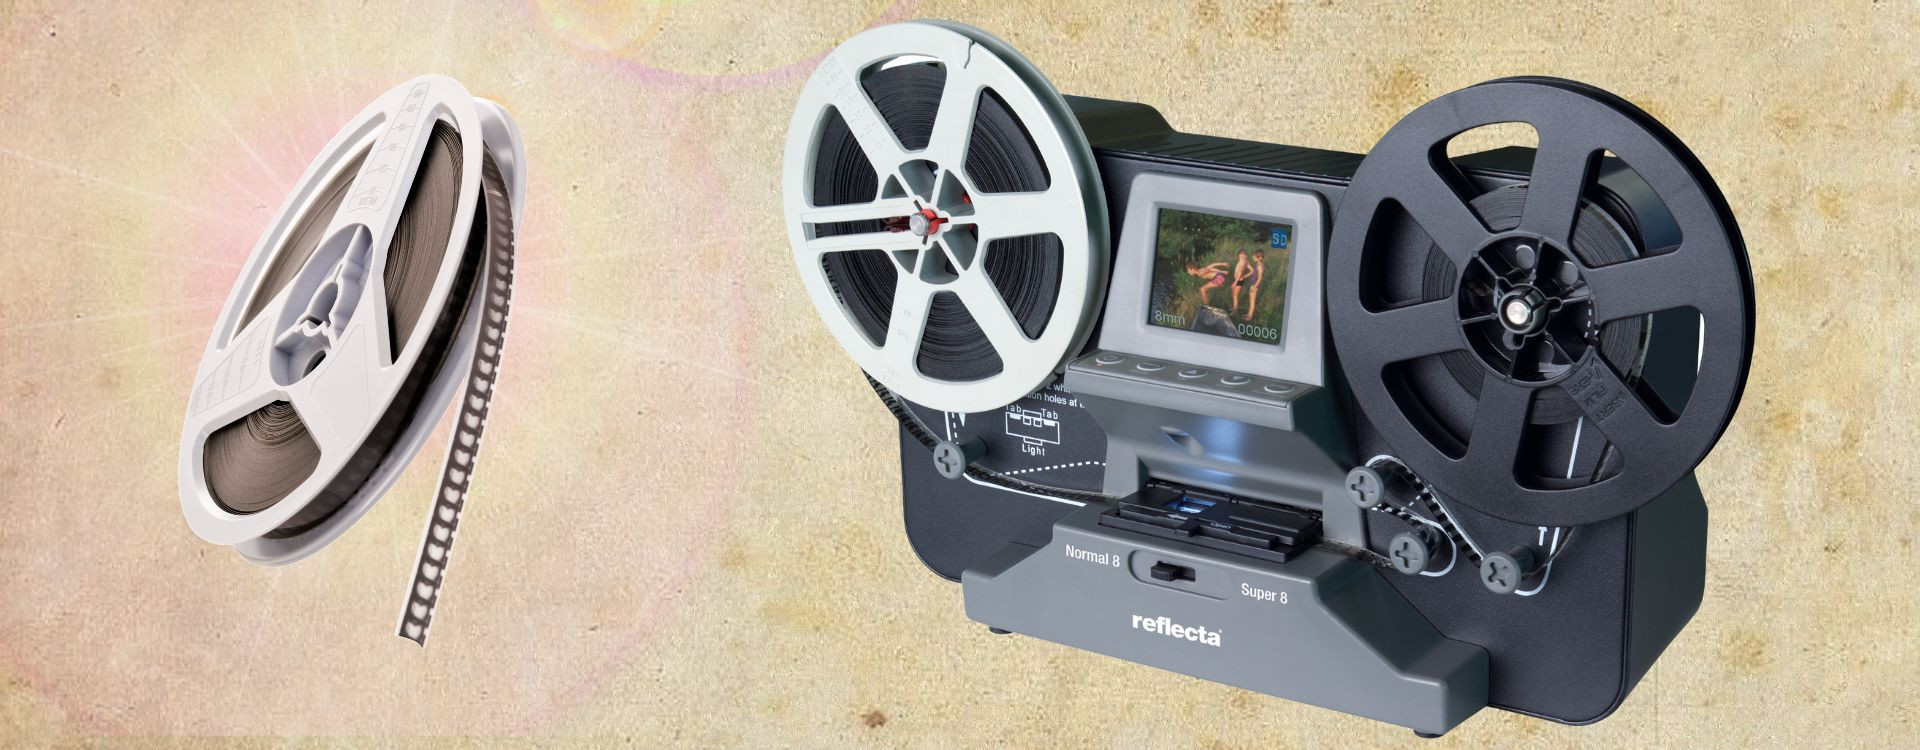 Everything You Need To Know About How To Digitize Super 8 Film – Capture